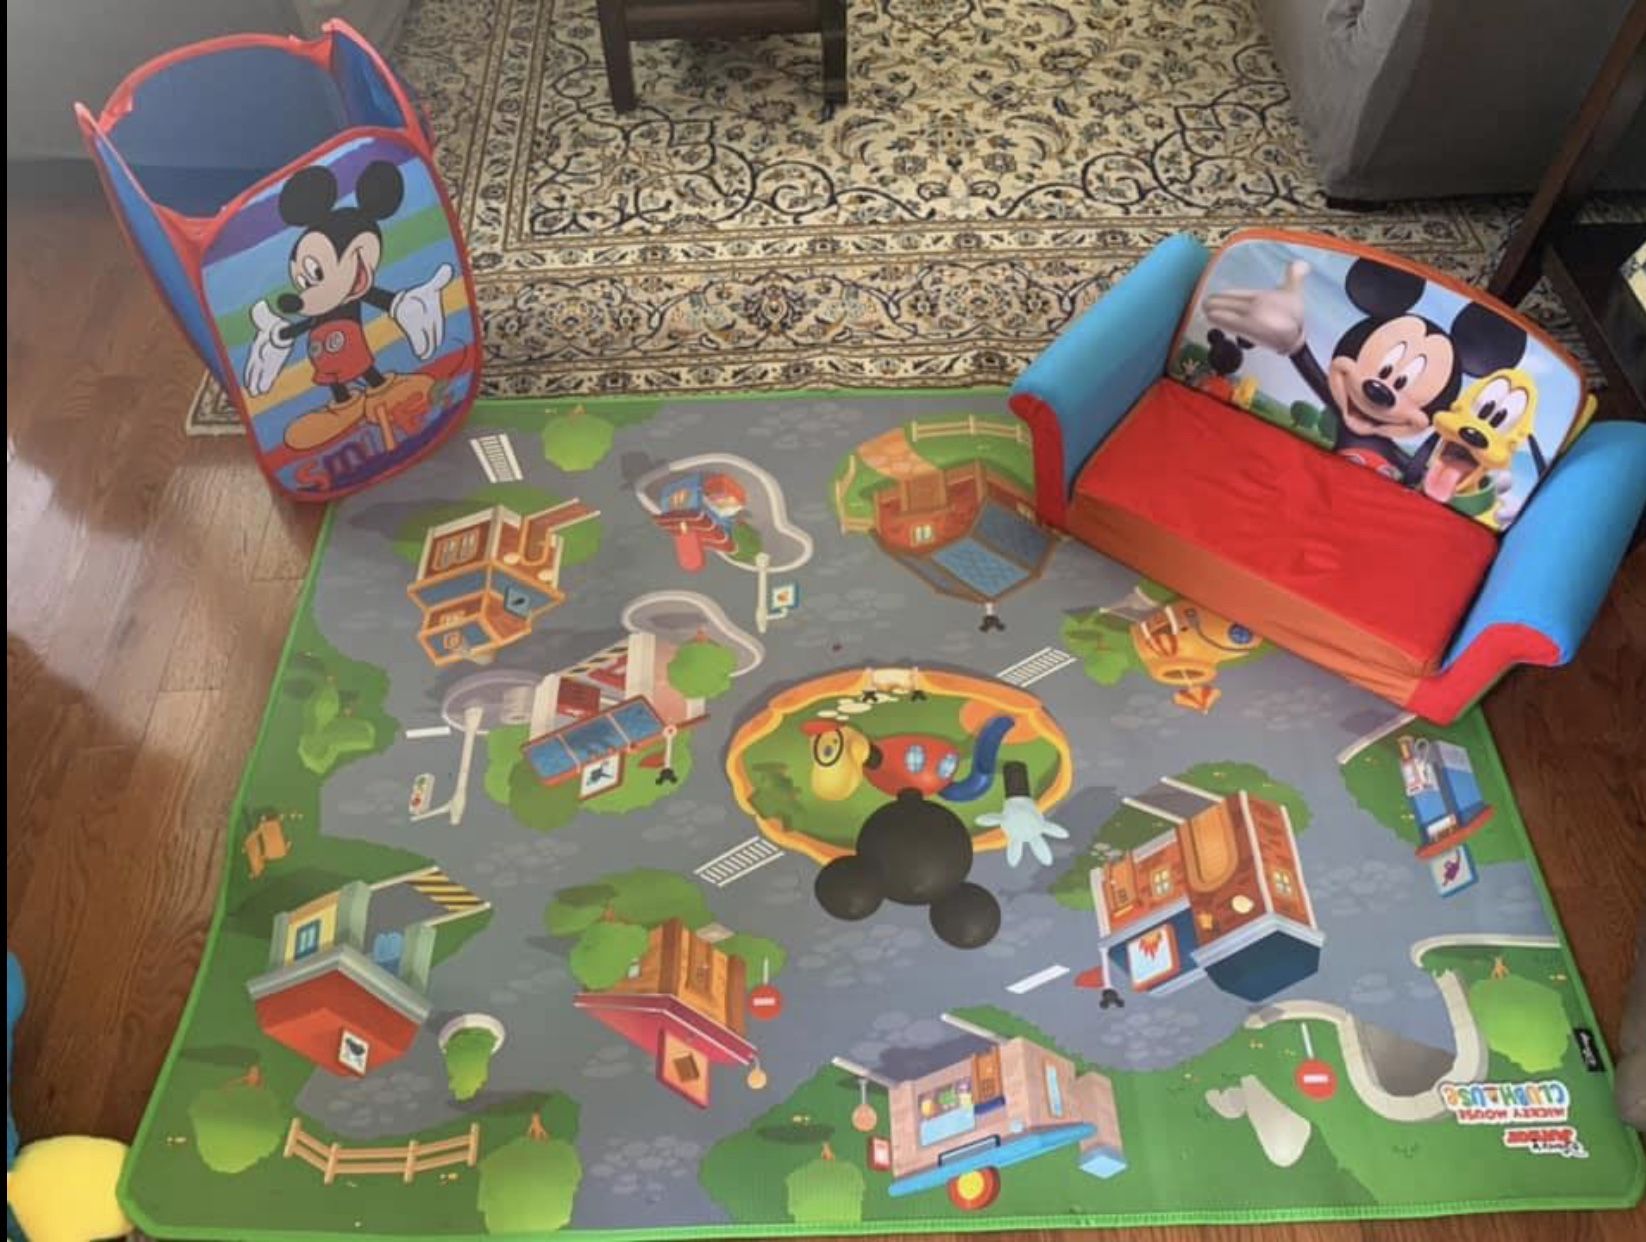 Mickey Mouse Clubhouse kid’s room decoration with Mickey Doll! Cute children’s toys